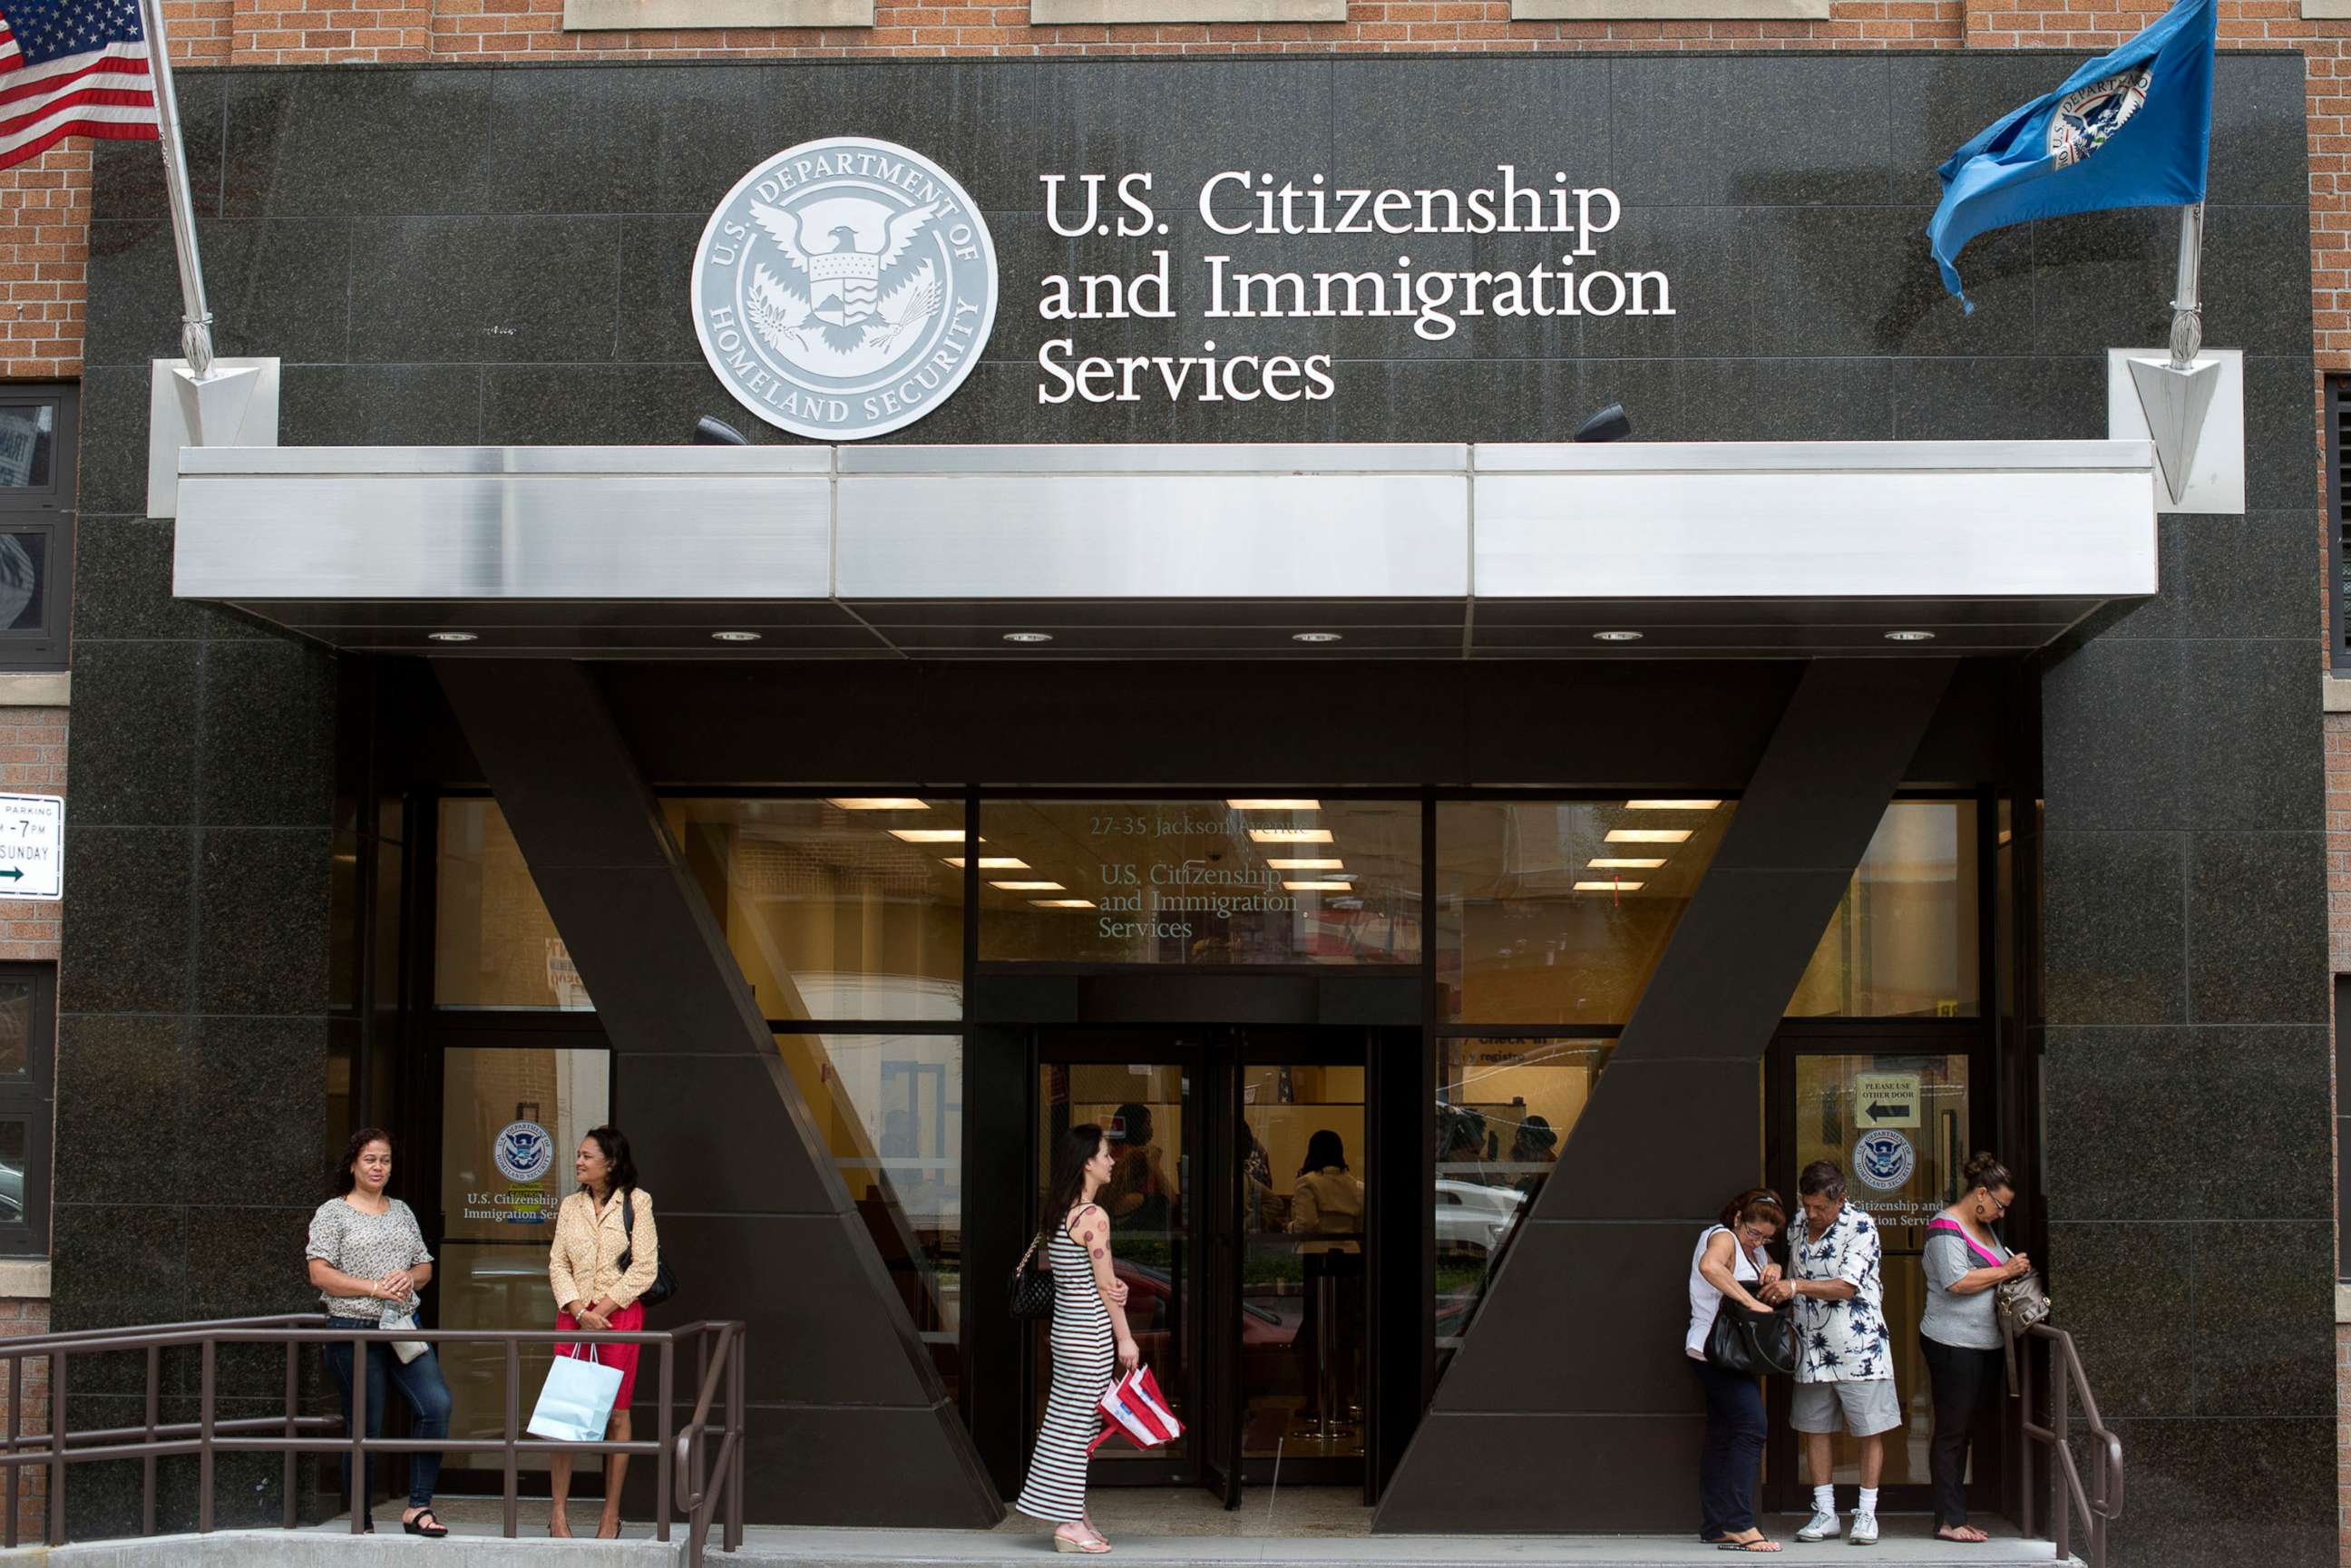 PHOTO: In this Aug. 15, 2012, file photo, people stand on the steps of the U.S. Citizenship and Immigration Services offices in New York.